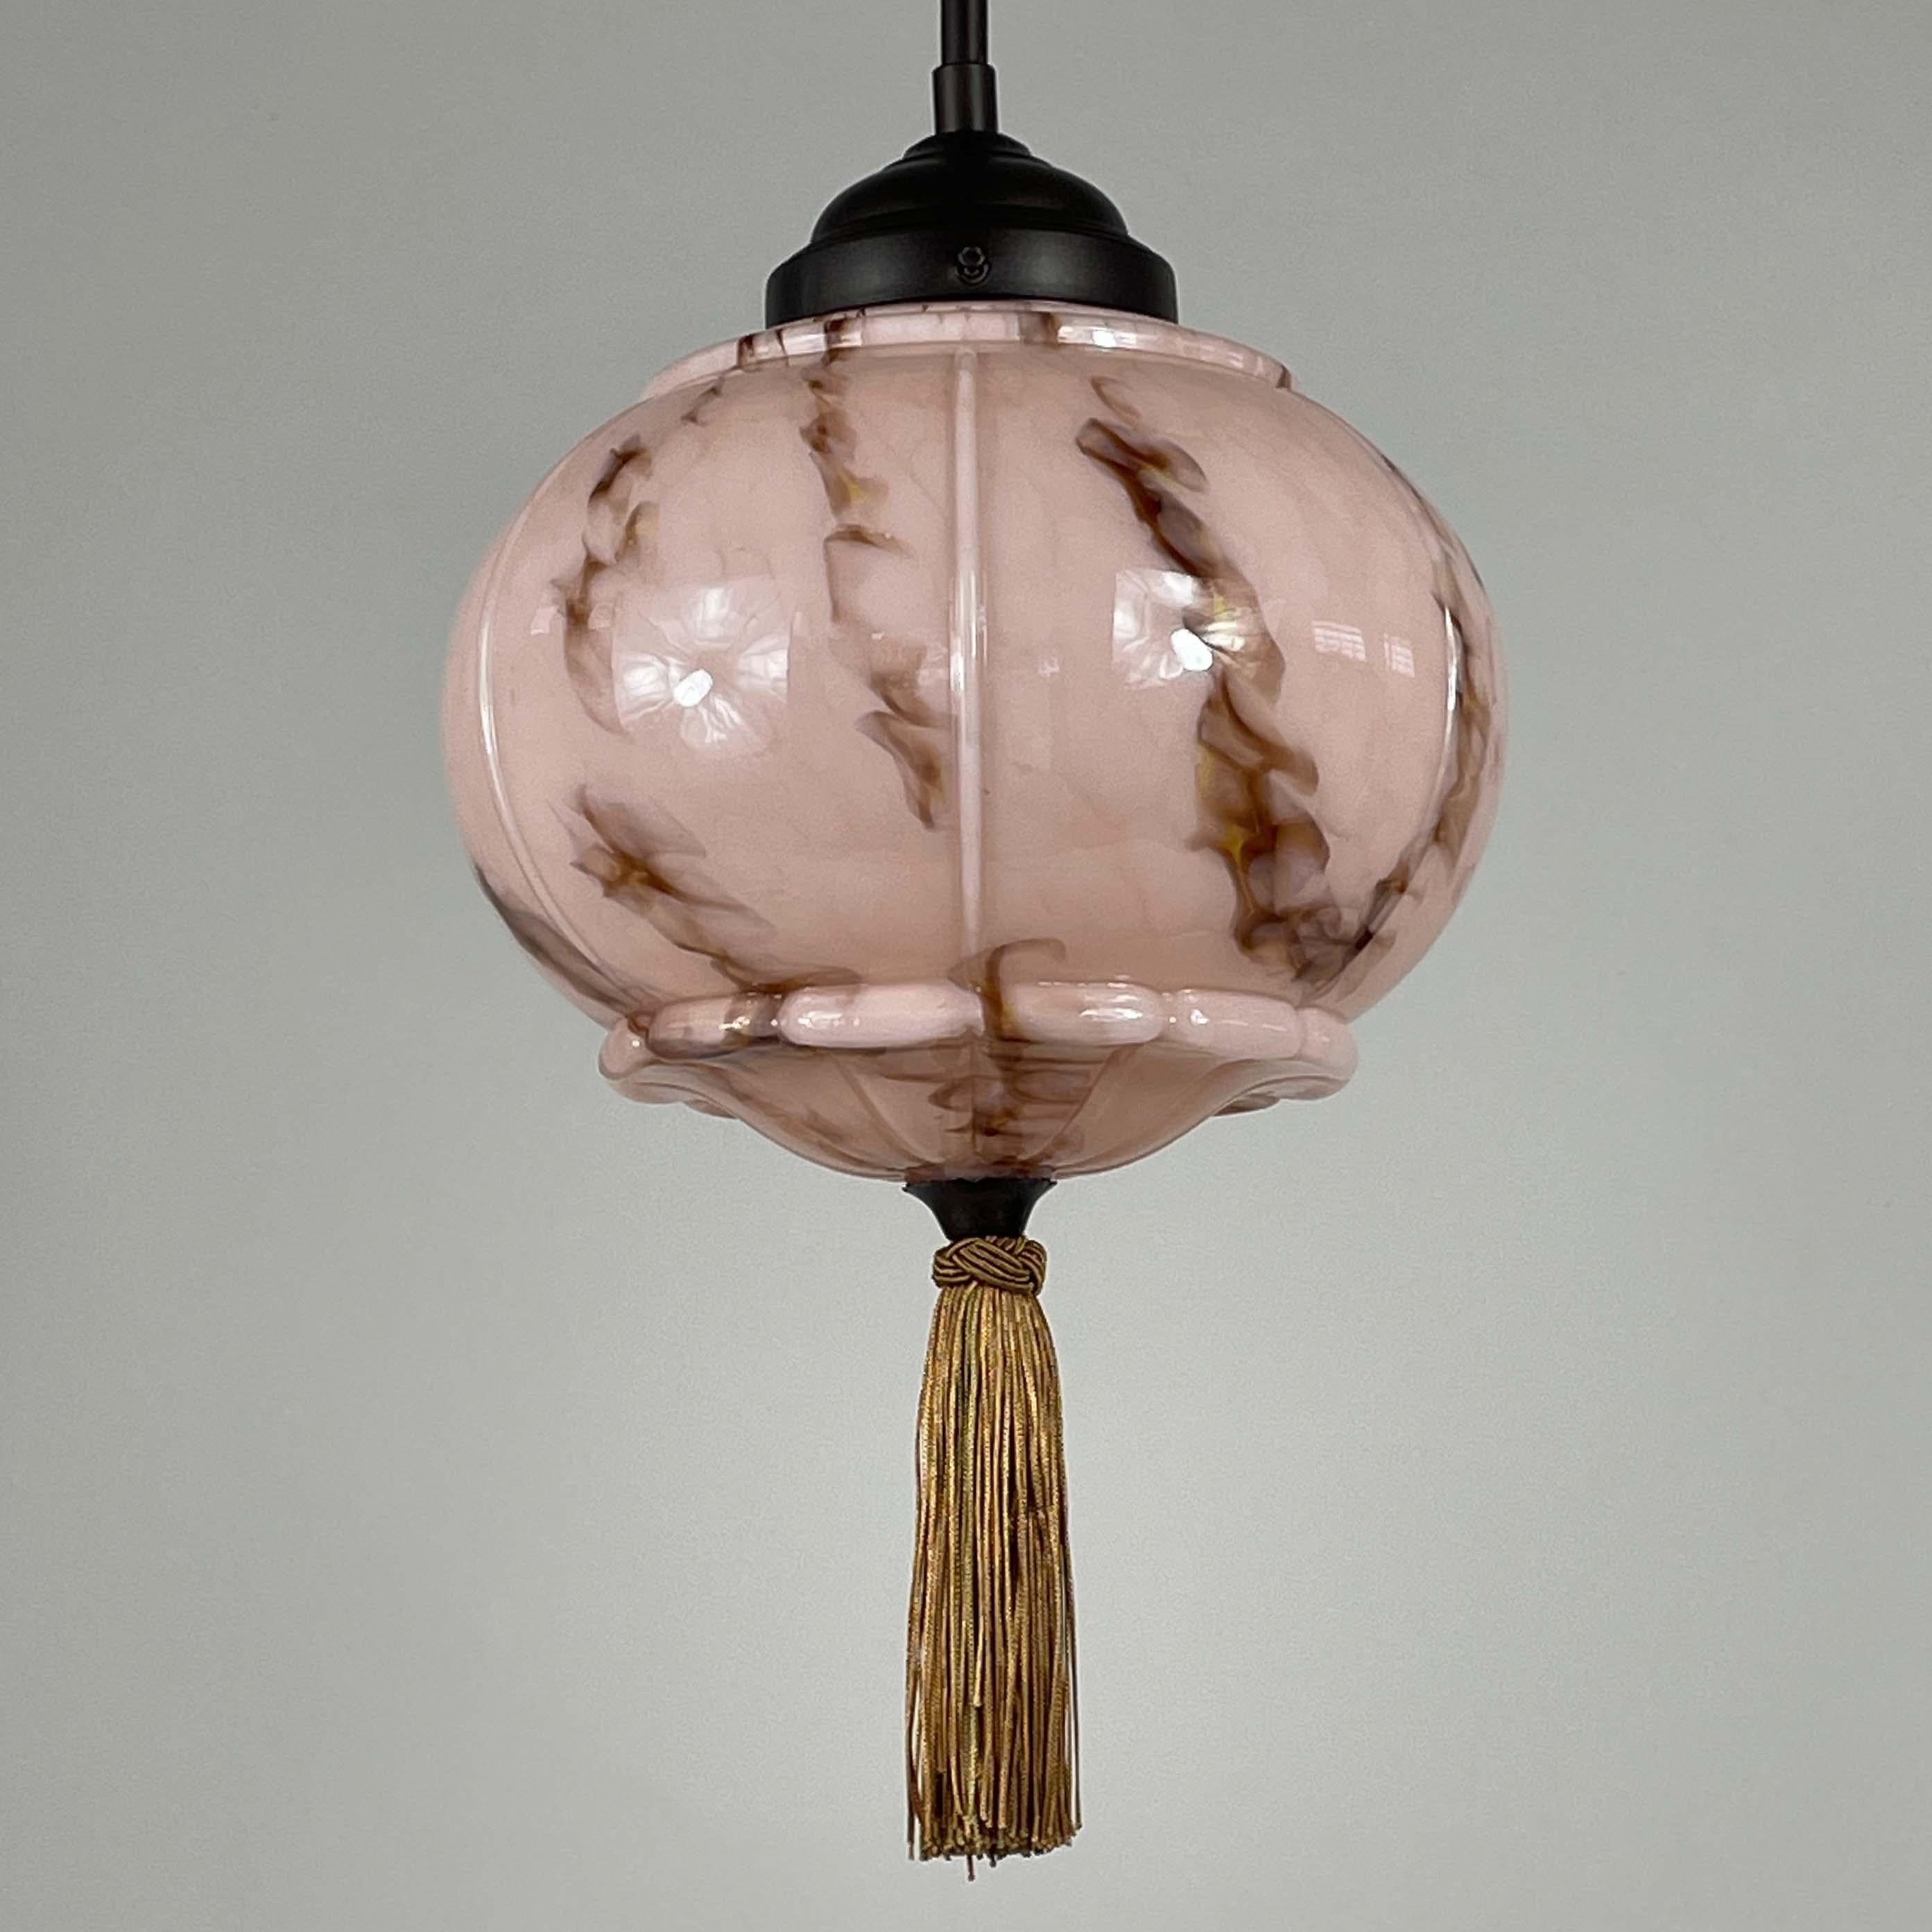 Metal Marbled Pale Rose Opaline & Bronzed Pendant with Tassel, Germany 1920s 1930s For Sale